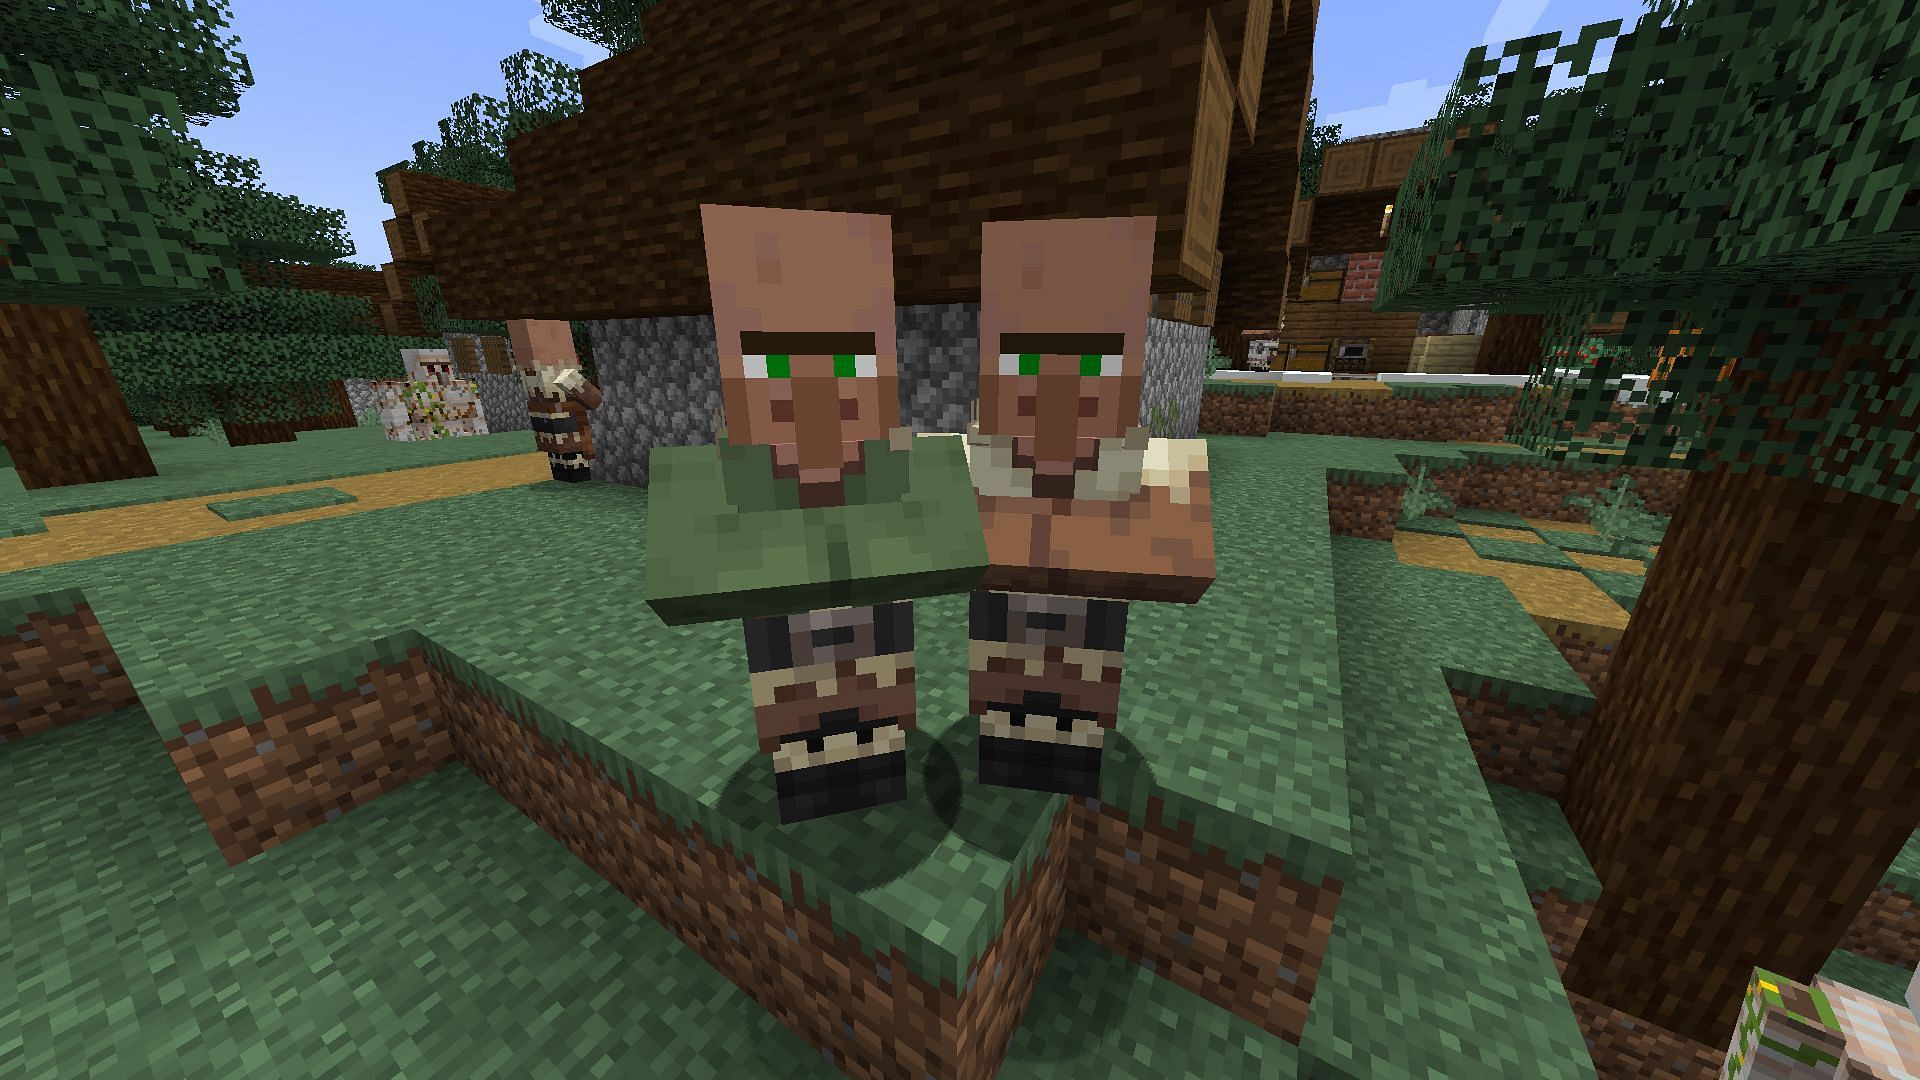 The left one is a nitwit, while the right one is a regular villager that can take up a job in Minecraft (Image via Mojang)